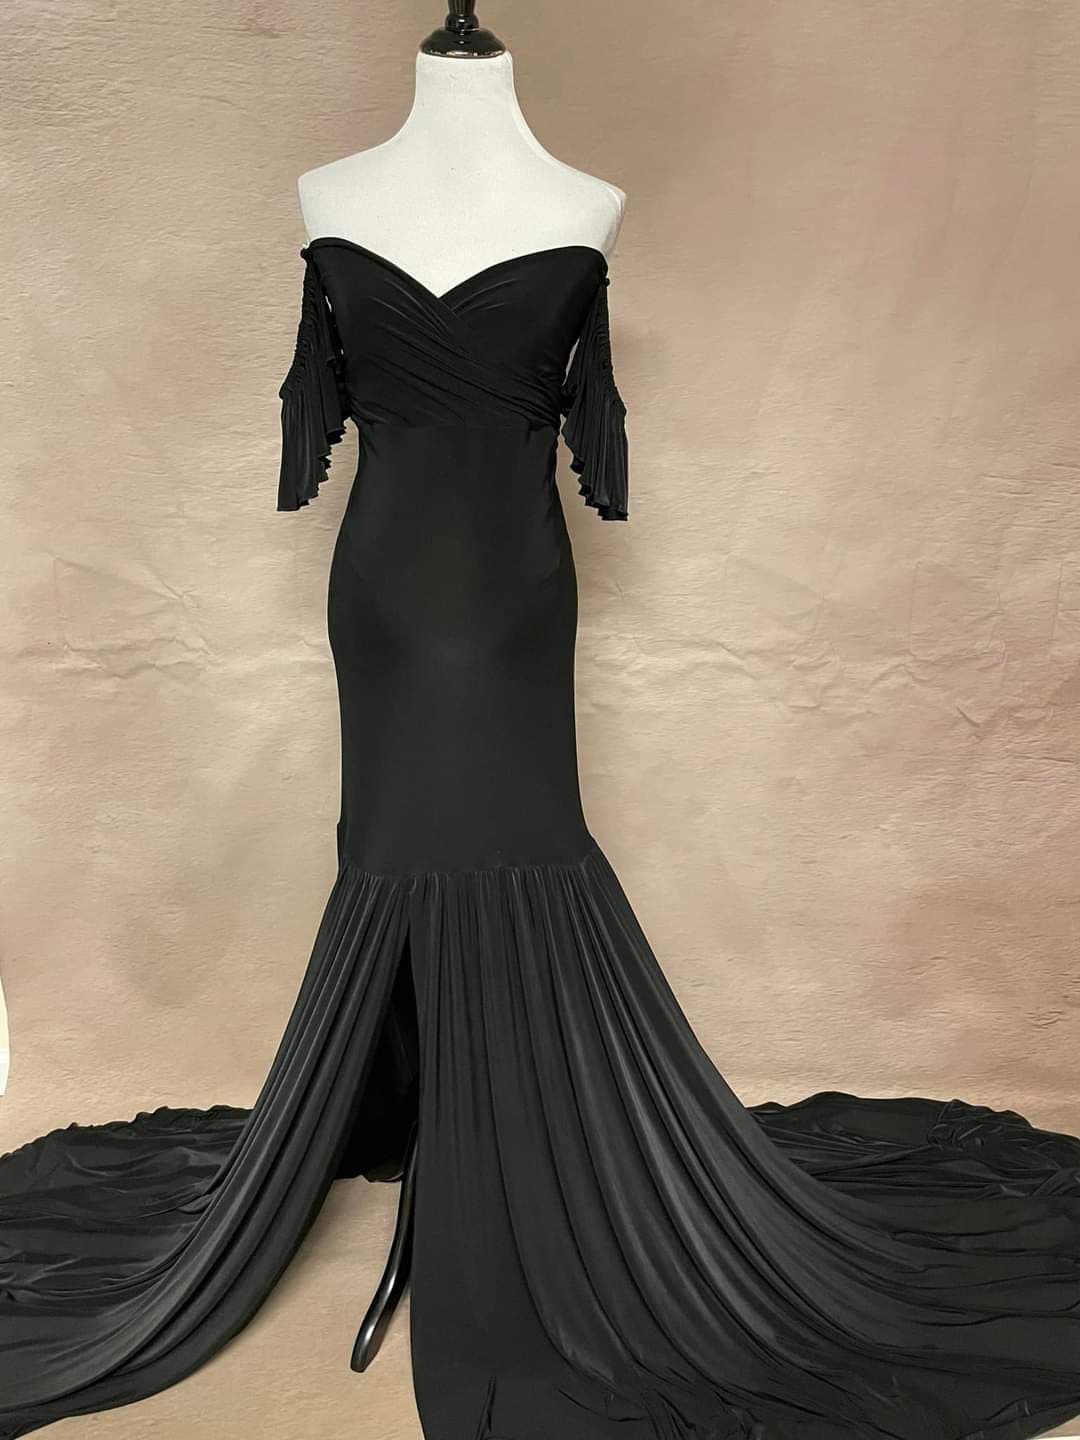 Black Giselle Gown - maternity photoshoot dress